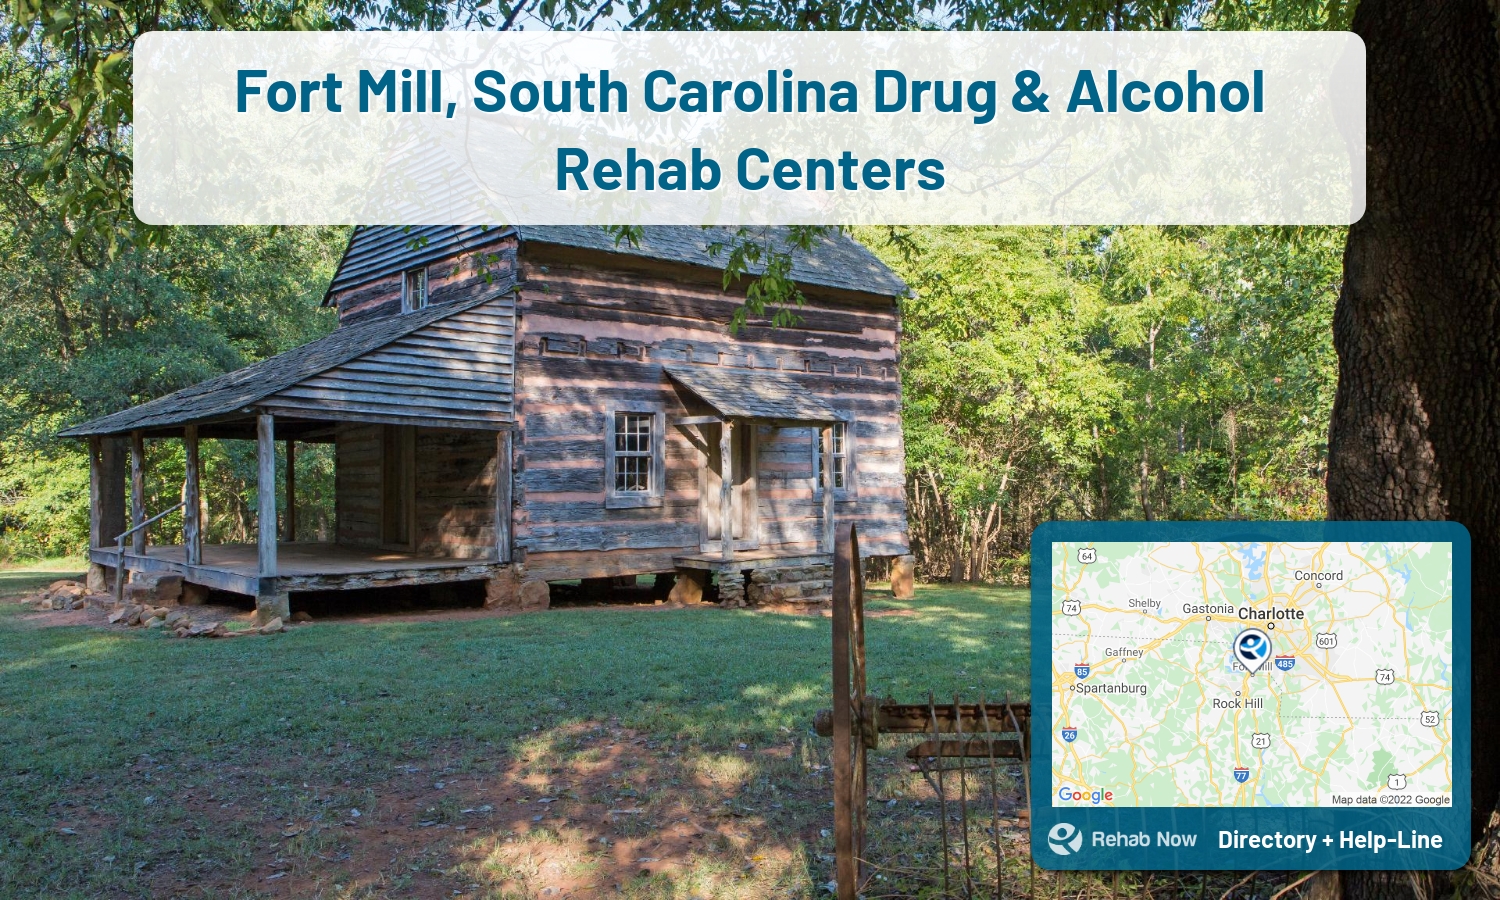 Let our expert counselors help find the best addiction treatment in Fort Mill, South Carolina now with a free call to our hotline.